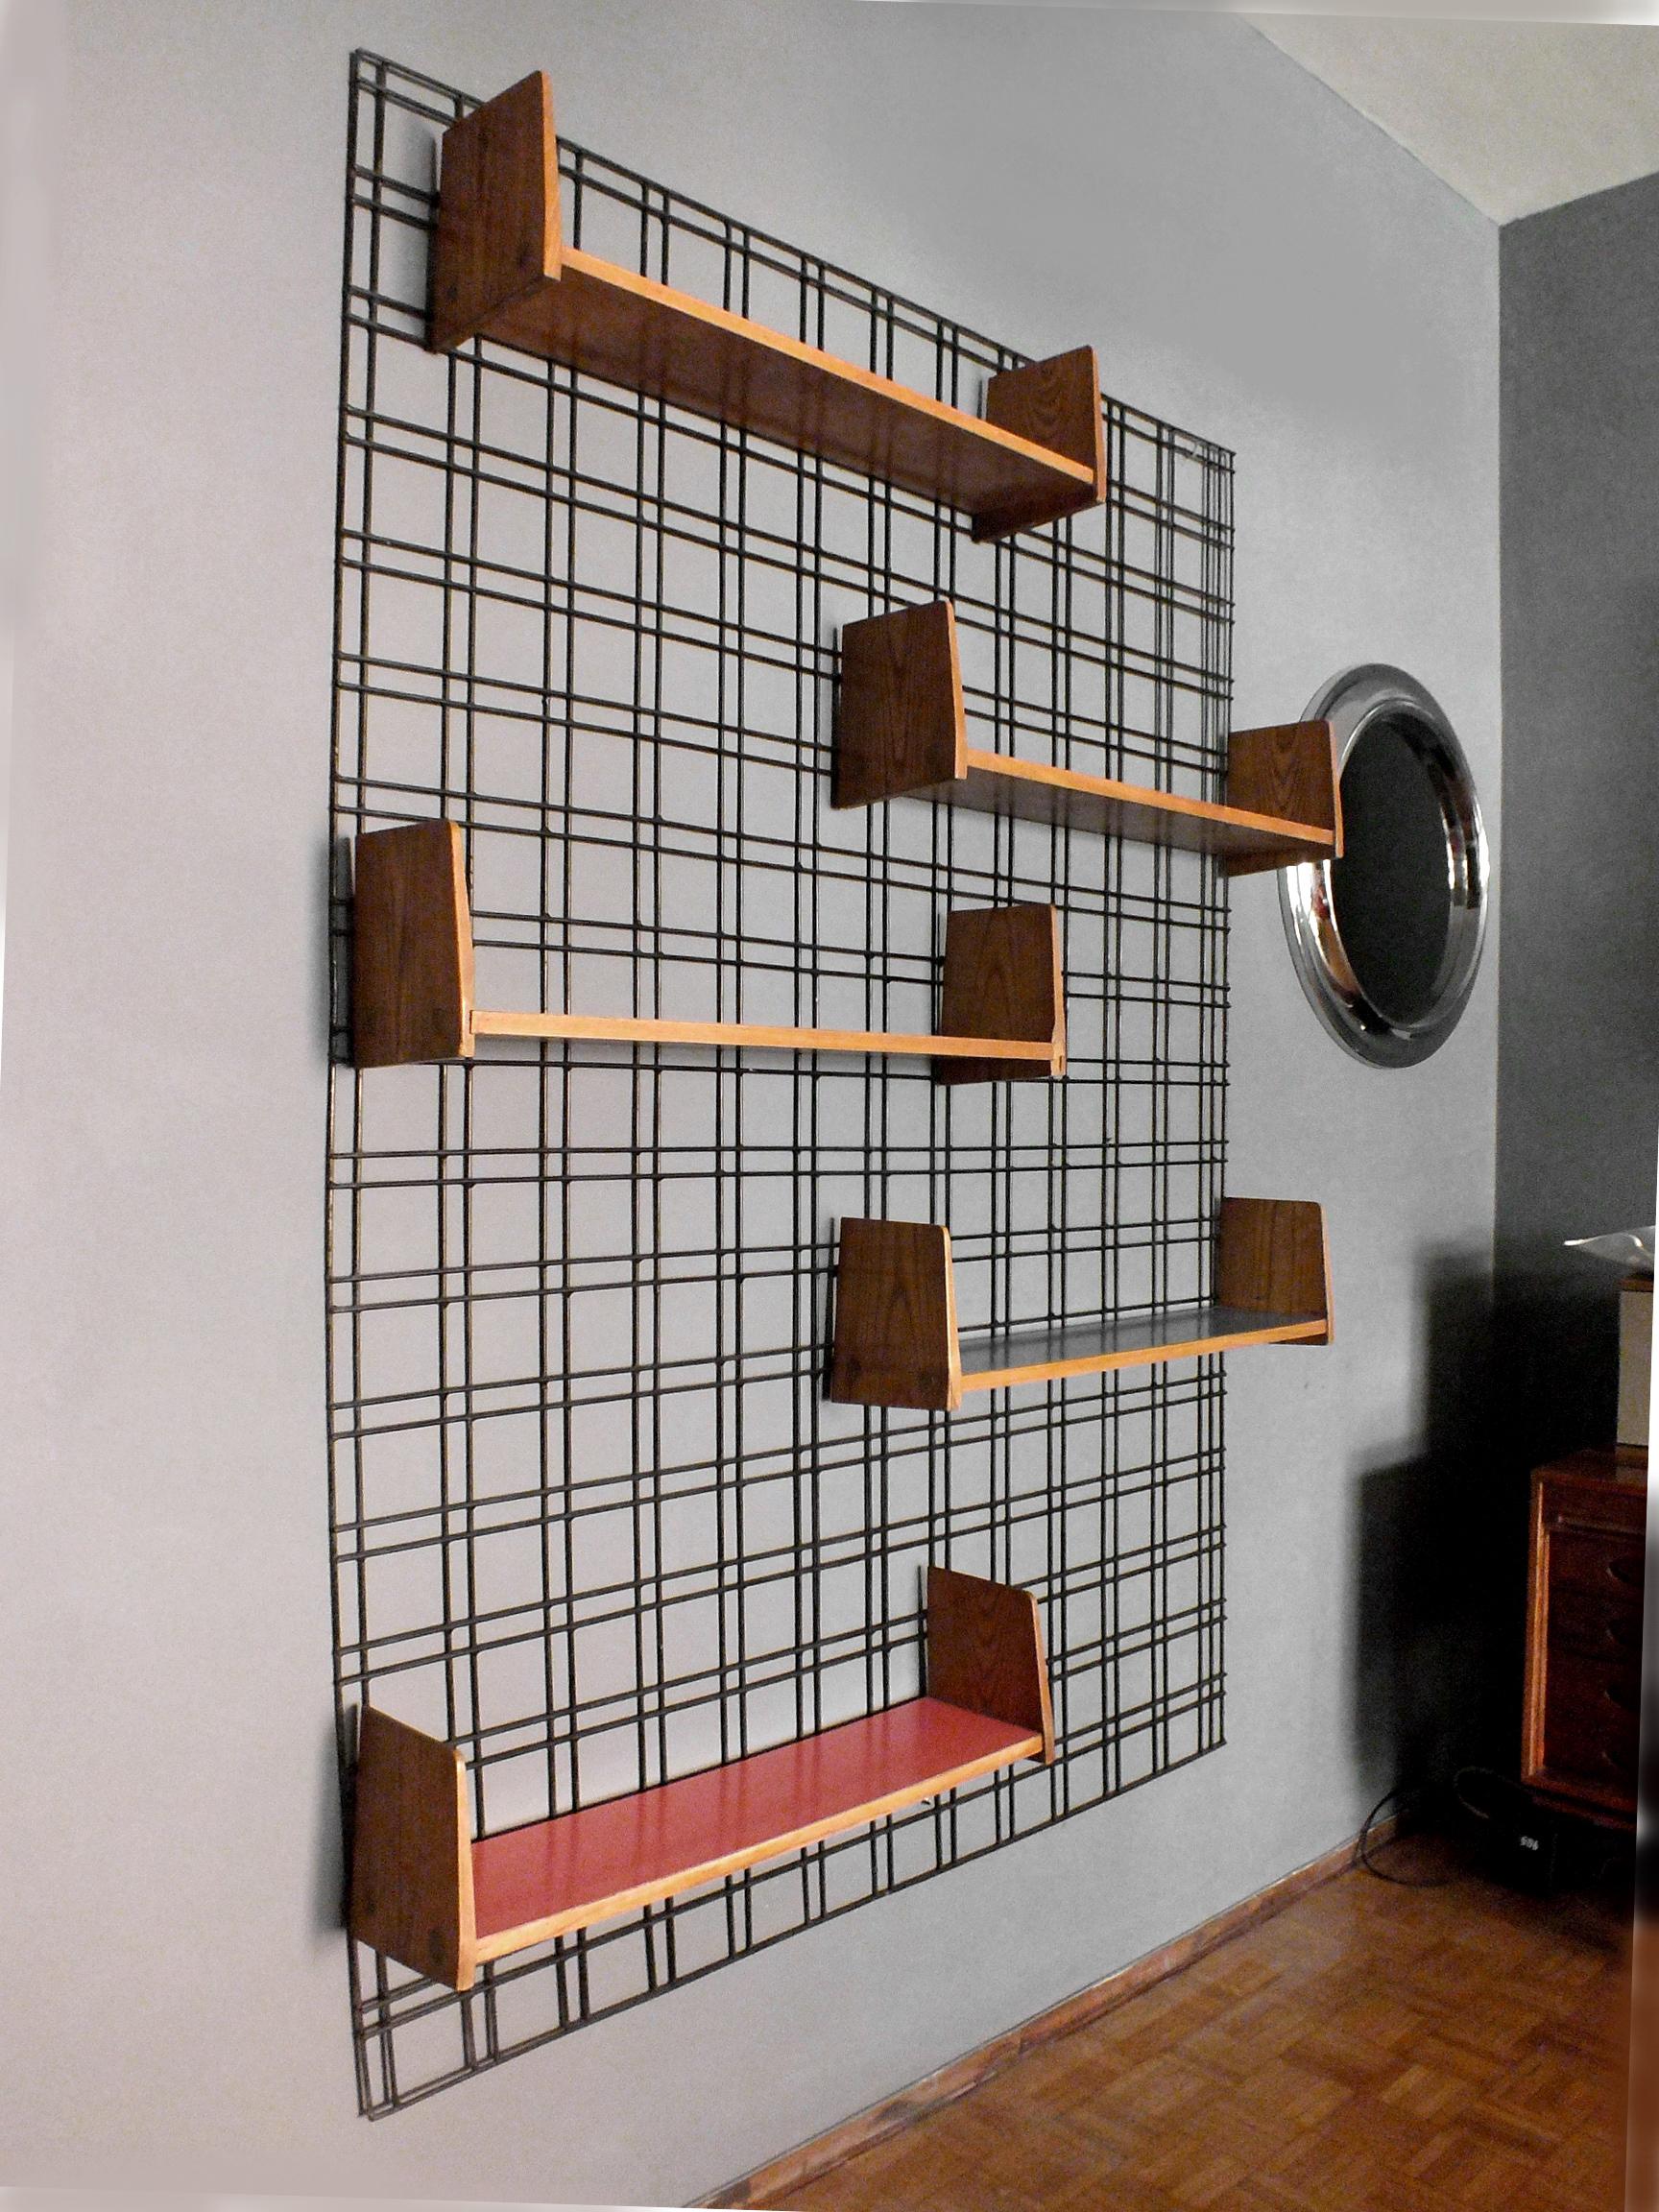 Gio Ponti design in years ’50 wall mounted bookcase by PFR studio (ponti fornaroli rosselli)

 
 wall-mounted grid in iron lacquered black features five independently adjustable shelves in solid walnut wood with application in 